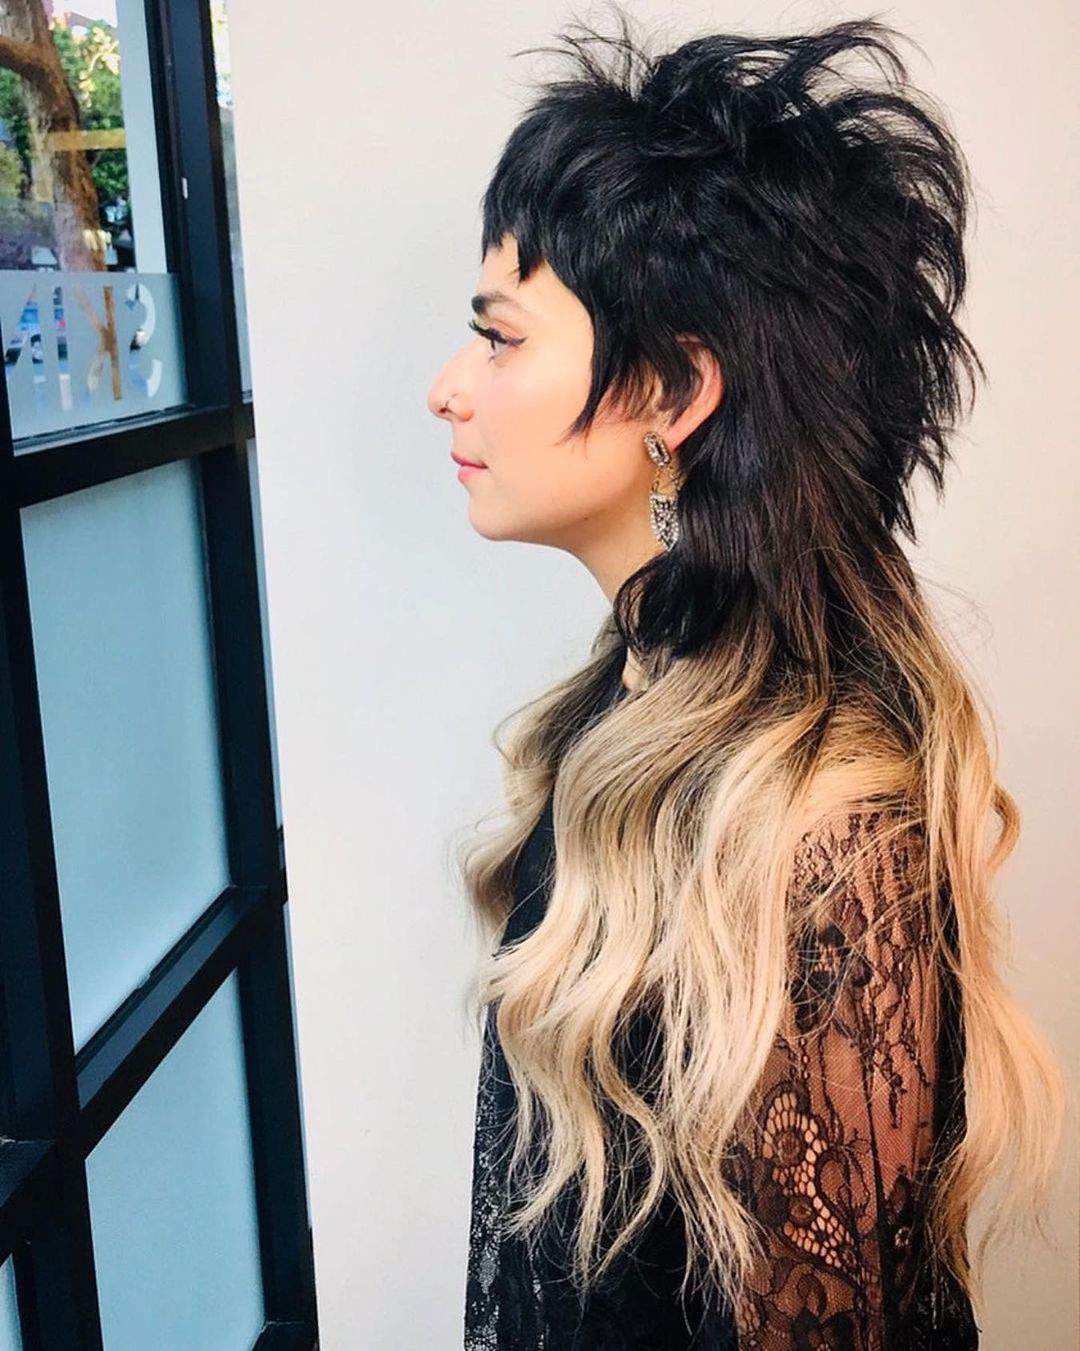 100+ Trendy Hairstyle Ideas For Women To Try In 2021 images 61